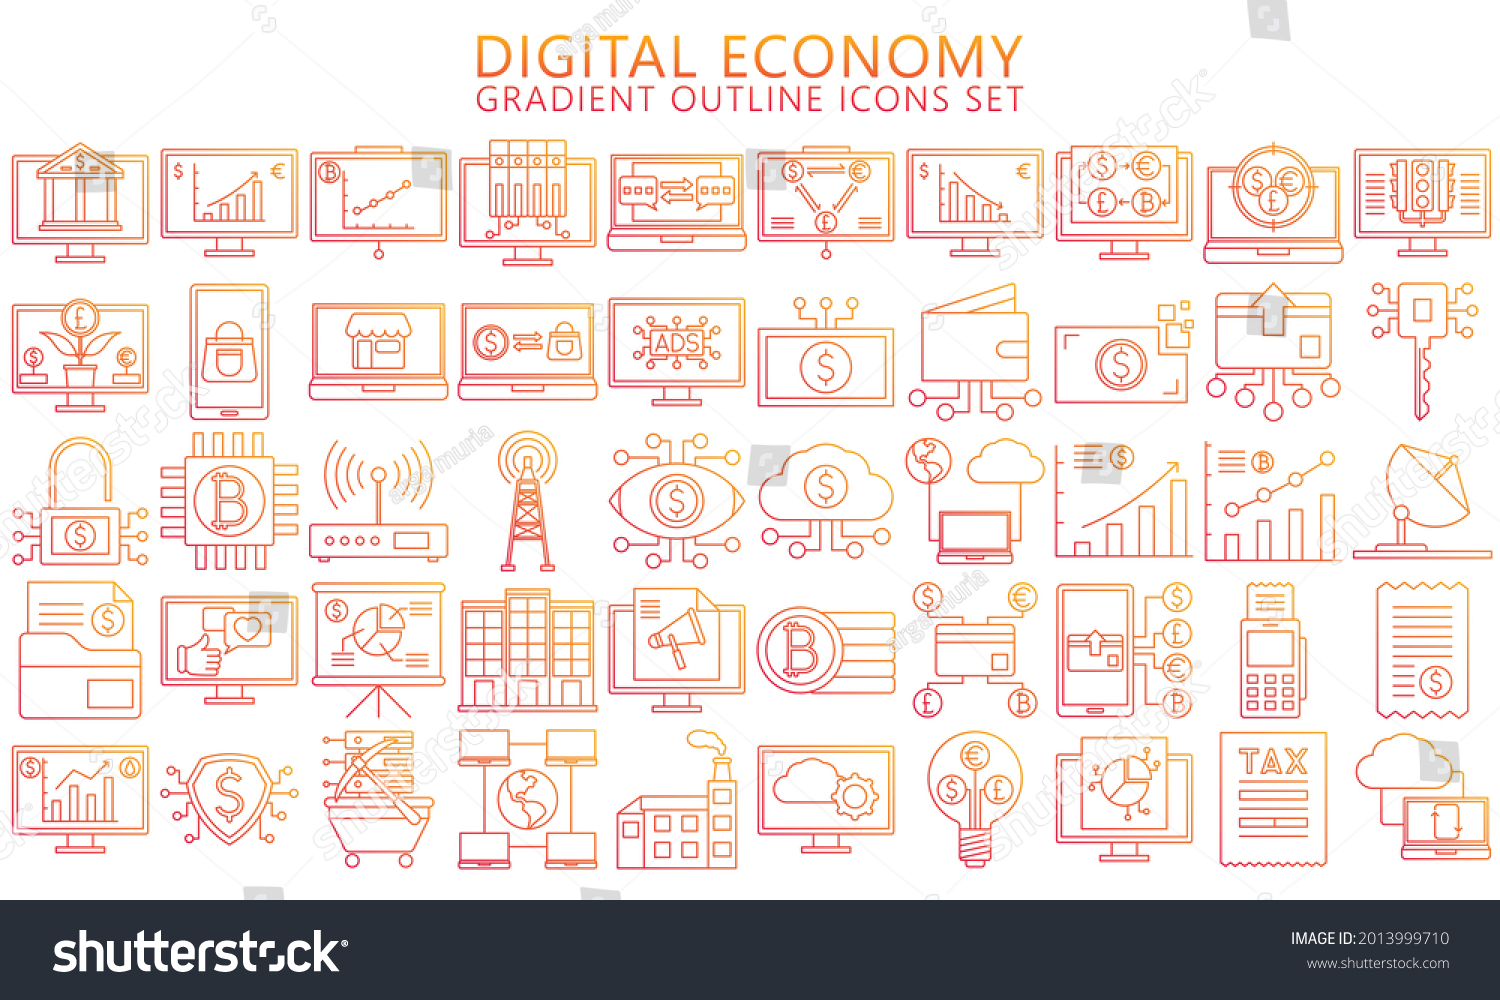 SVG of Digital Economy thin gradient outline icons set, contain such as computer, crypto currency, diagram, finance symbol, Used for modern concepts, web, UI, UX kit and applications. ready convert to SVG svg